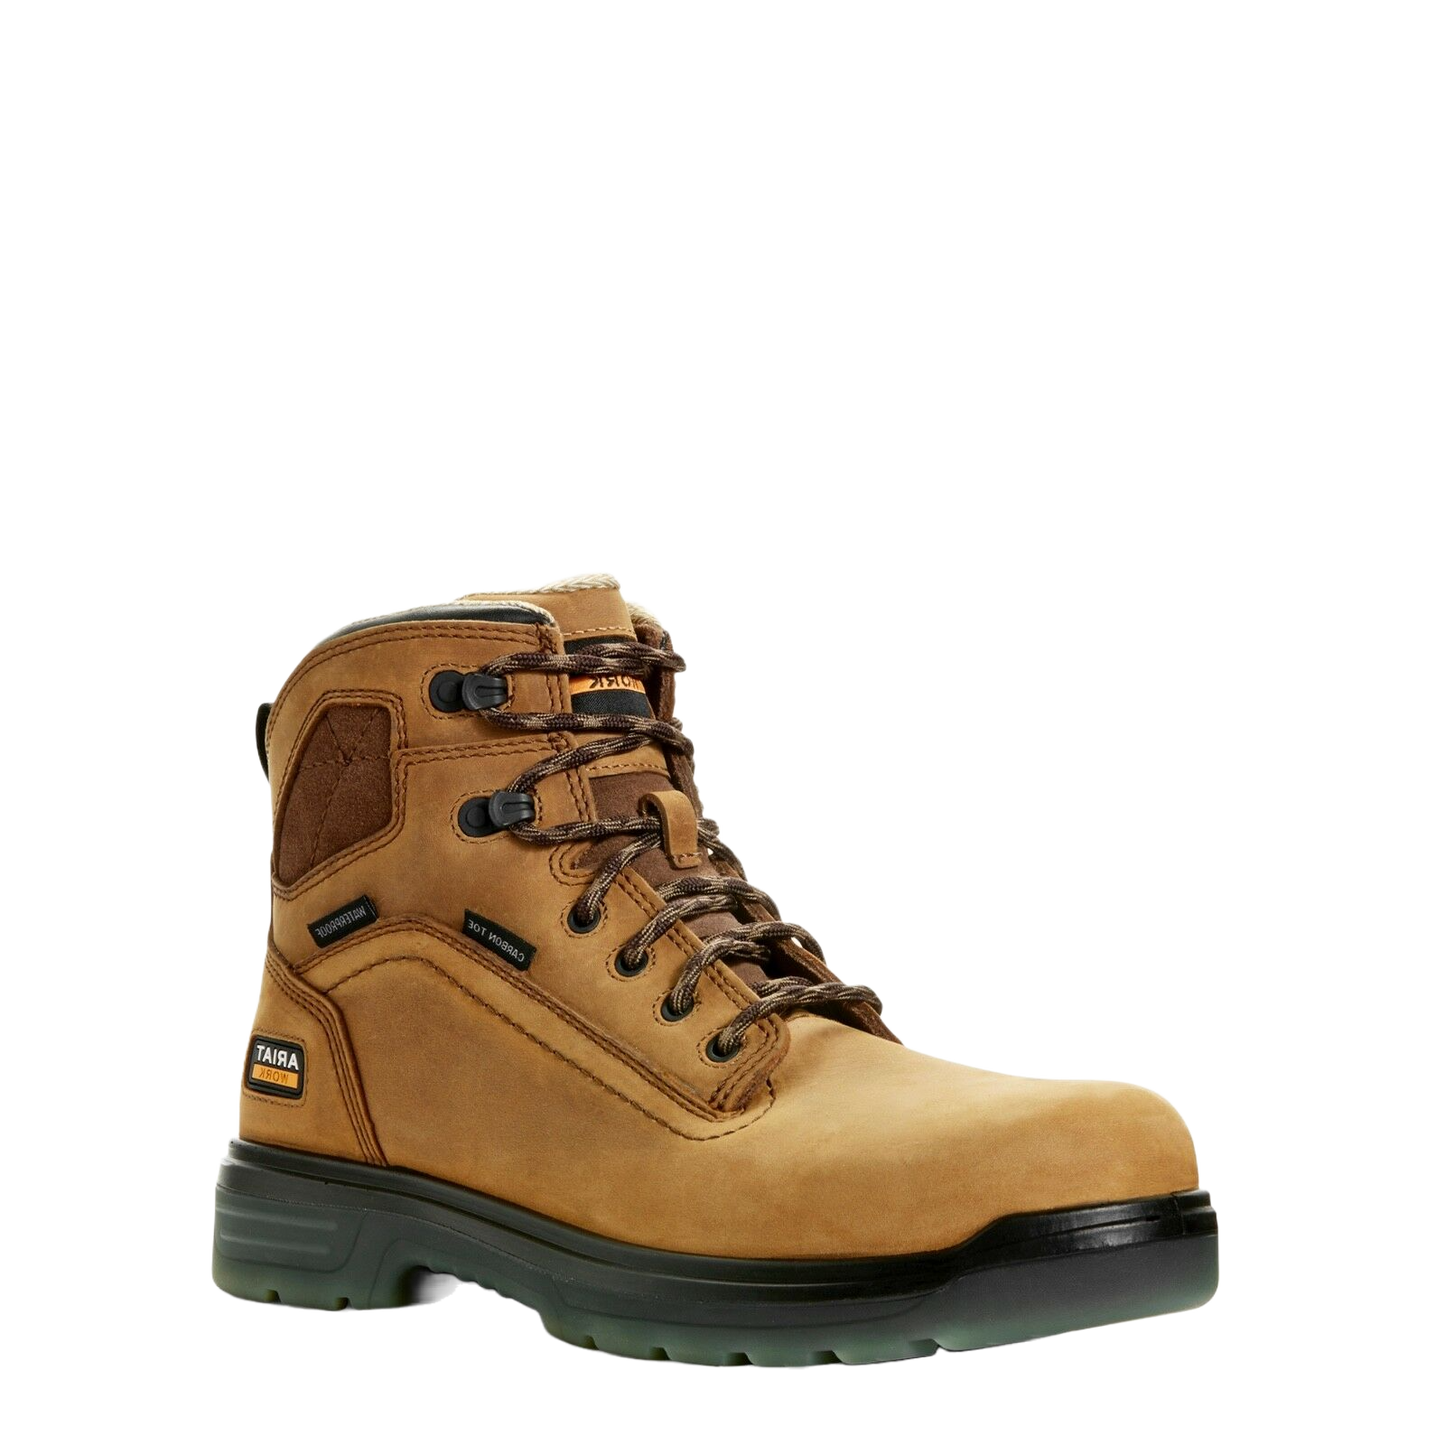 Load image into Gallery viewer, Ariat® Turbo 6 inch H2O Waterproof Composite Toe Work Boots 10027335
